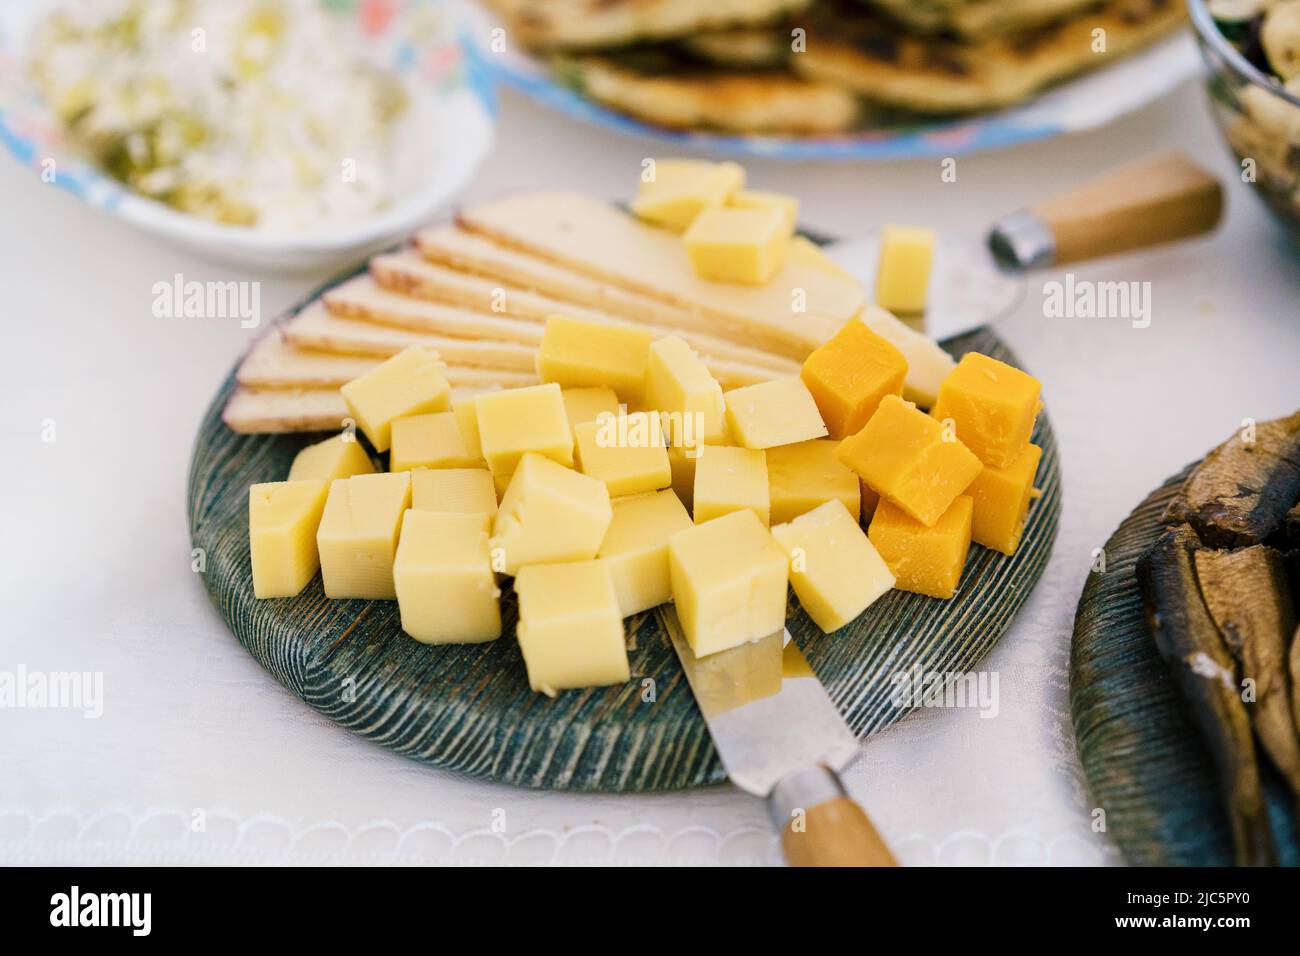 High angle view of cheese, knife, and salad dishes on table. Cheese platter with different sorts of cheese. Stock Photo